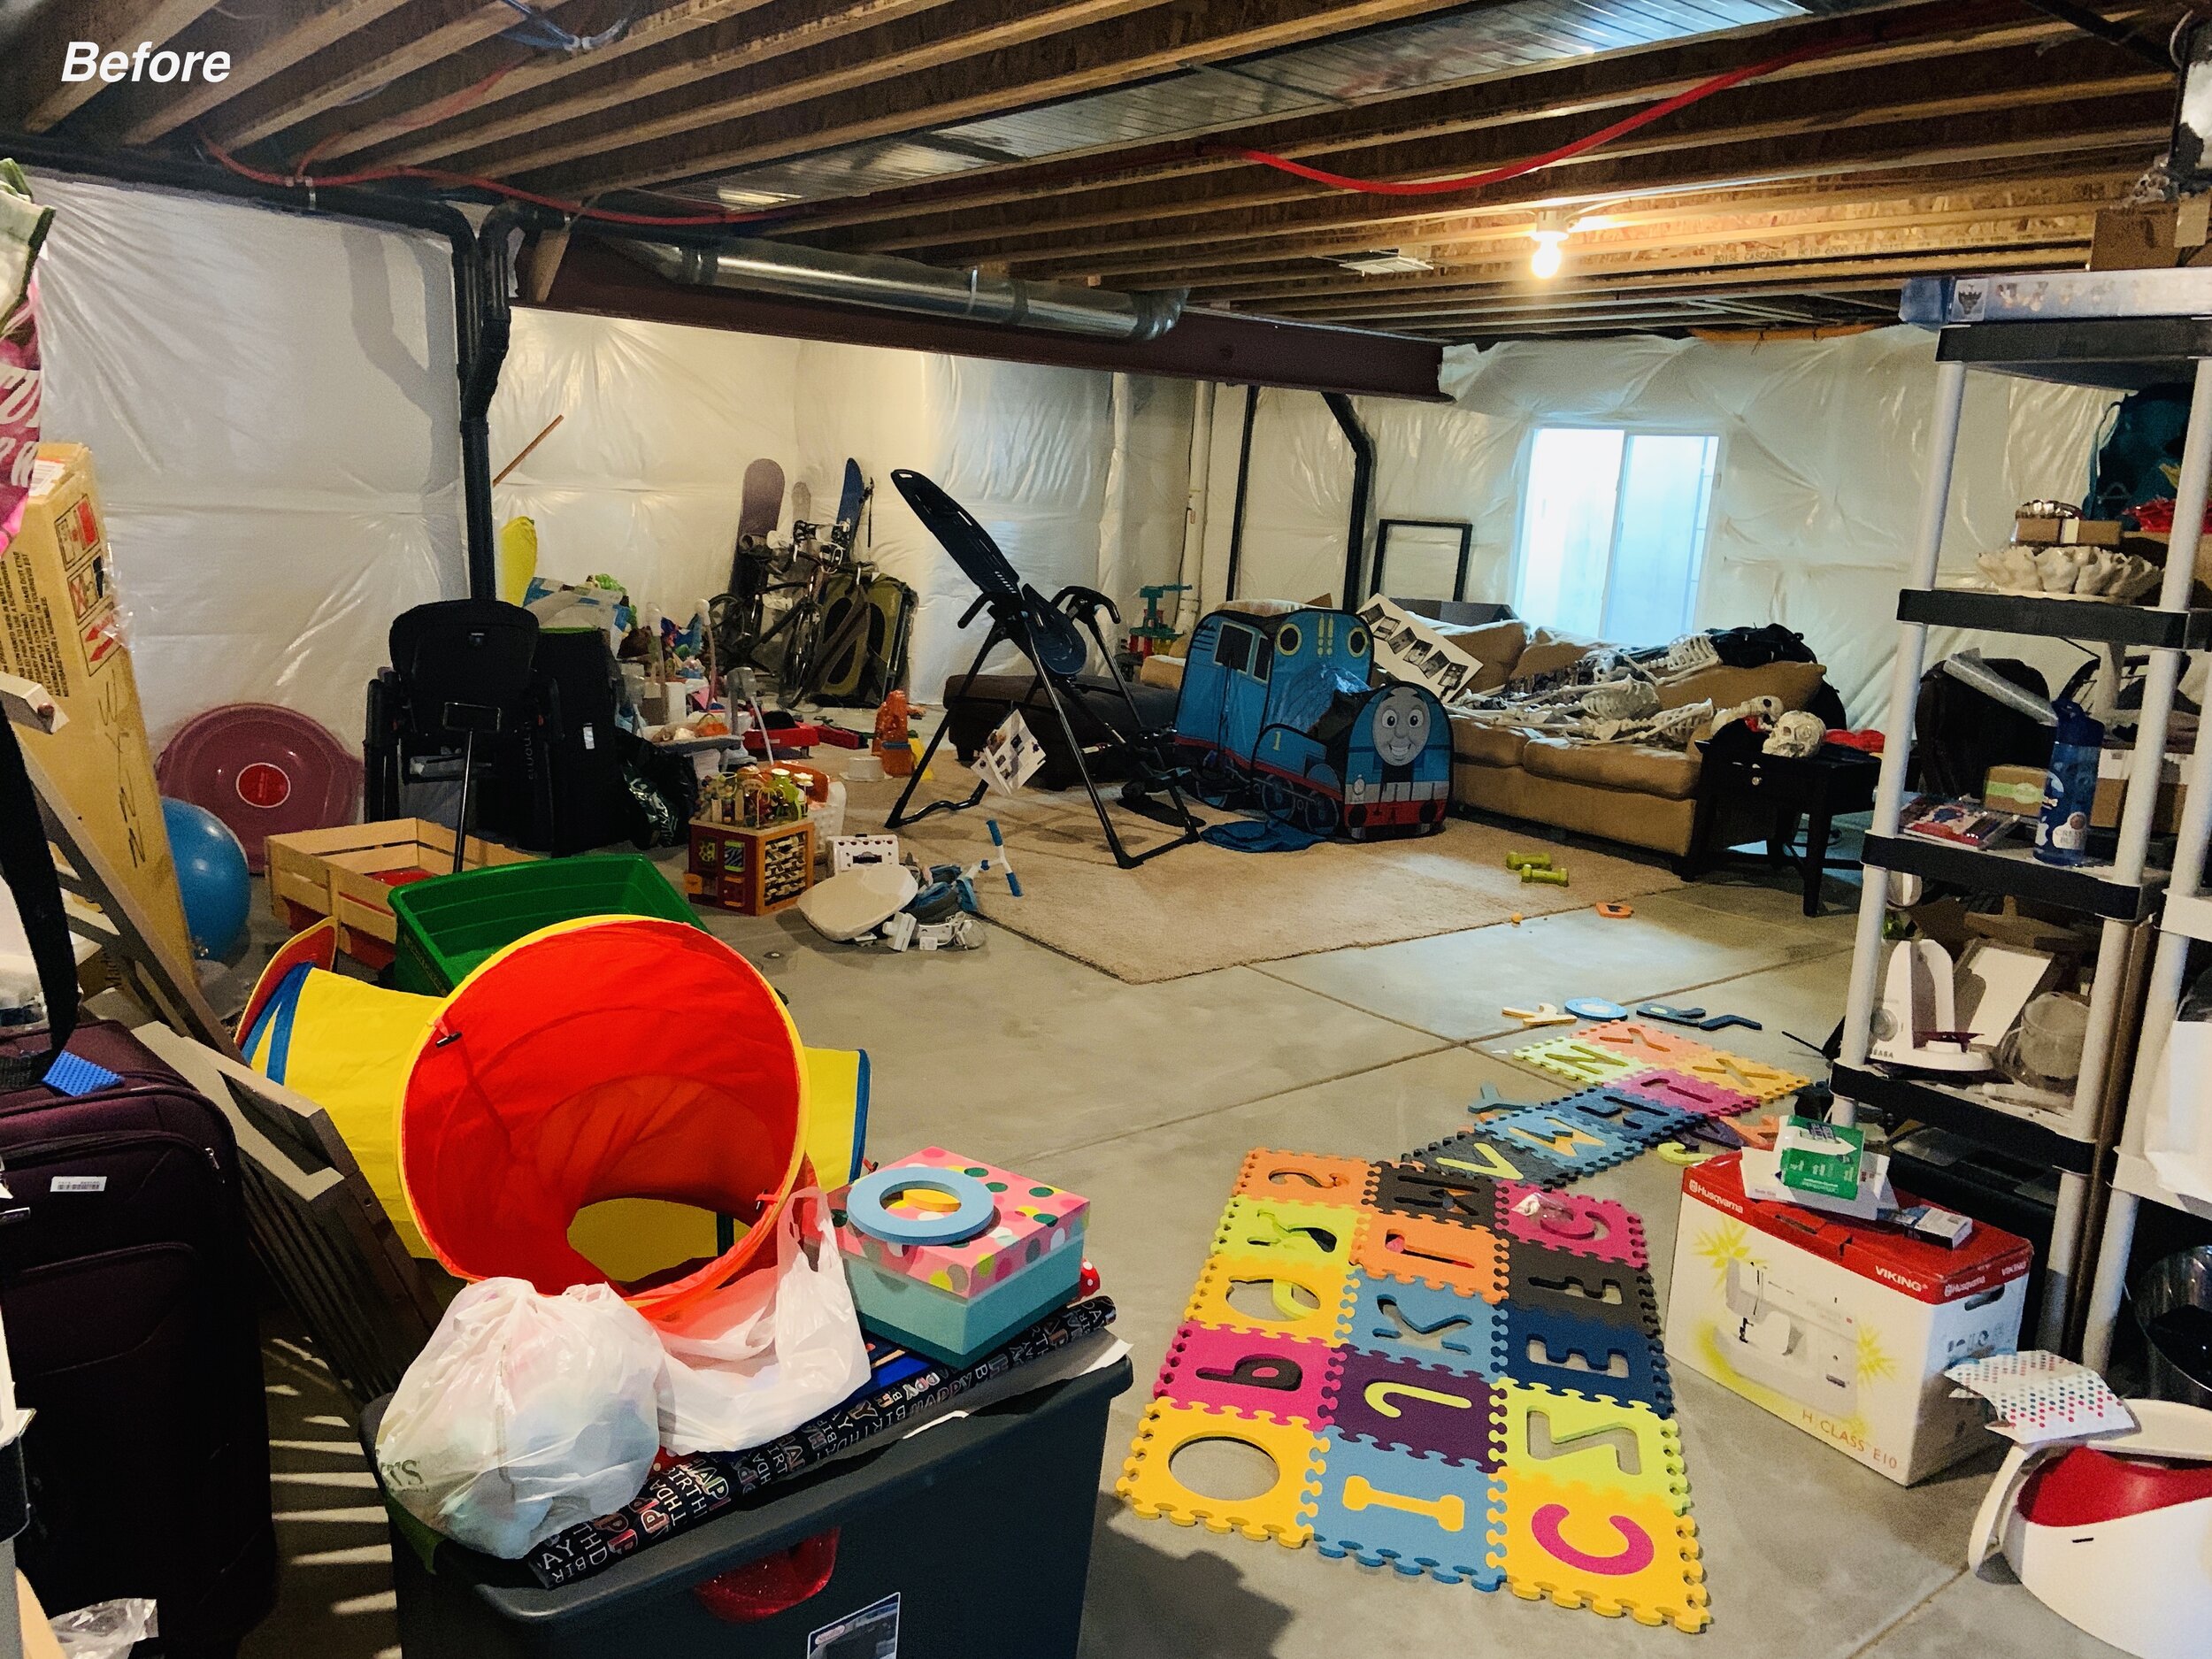 Large unfinished basement before photo with toys and items covering floor.